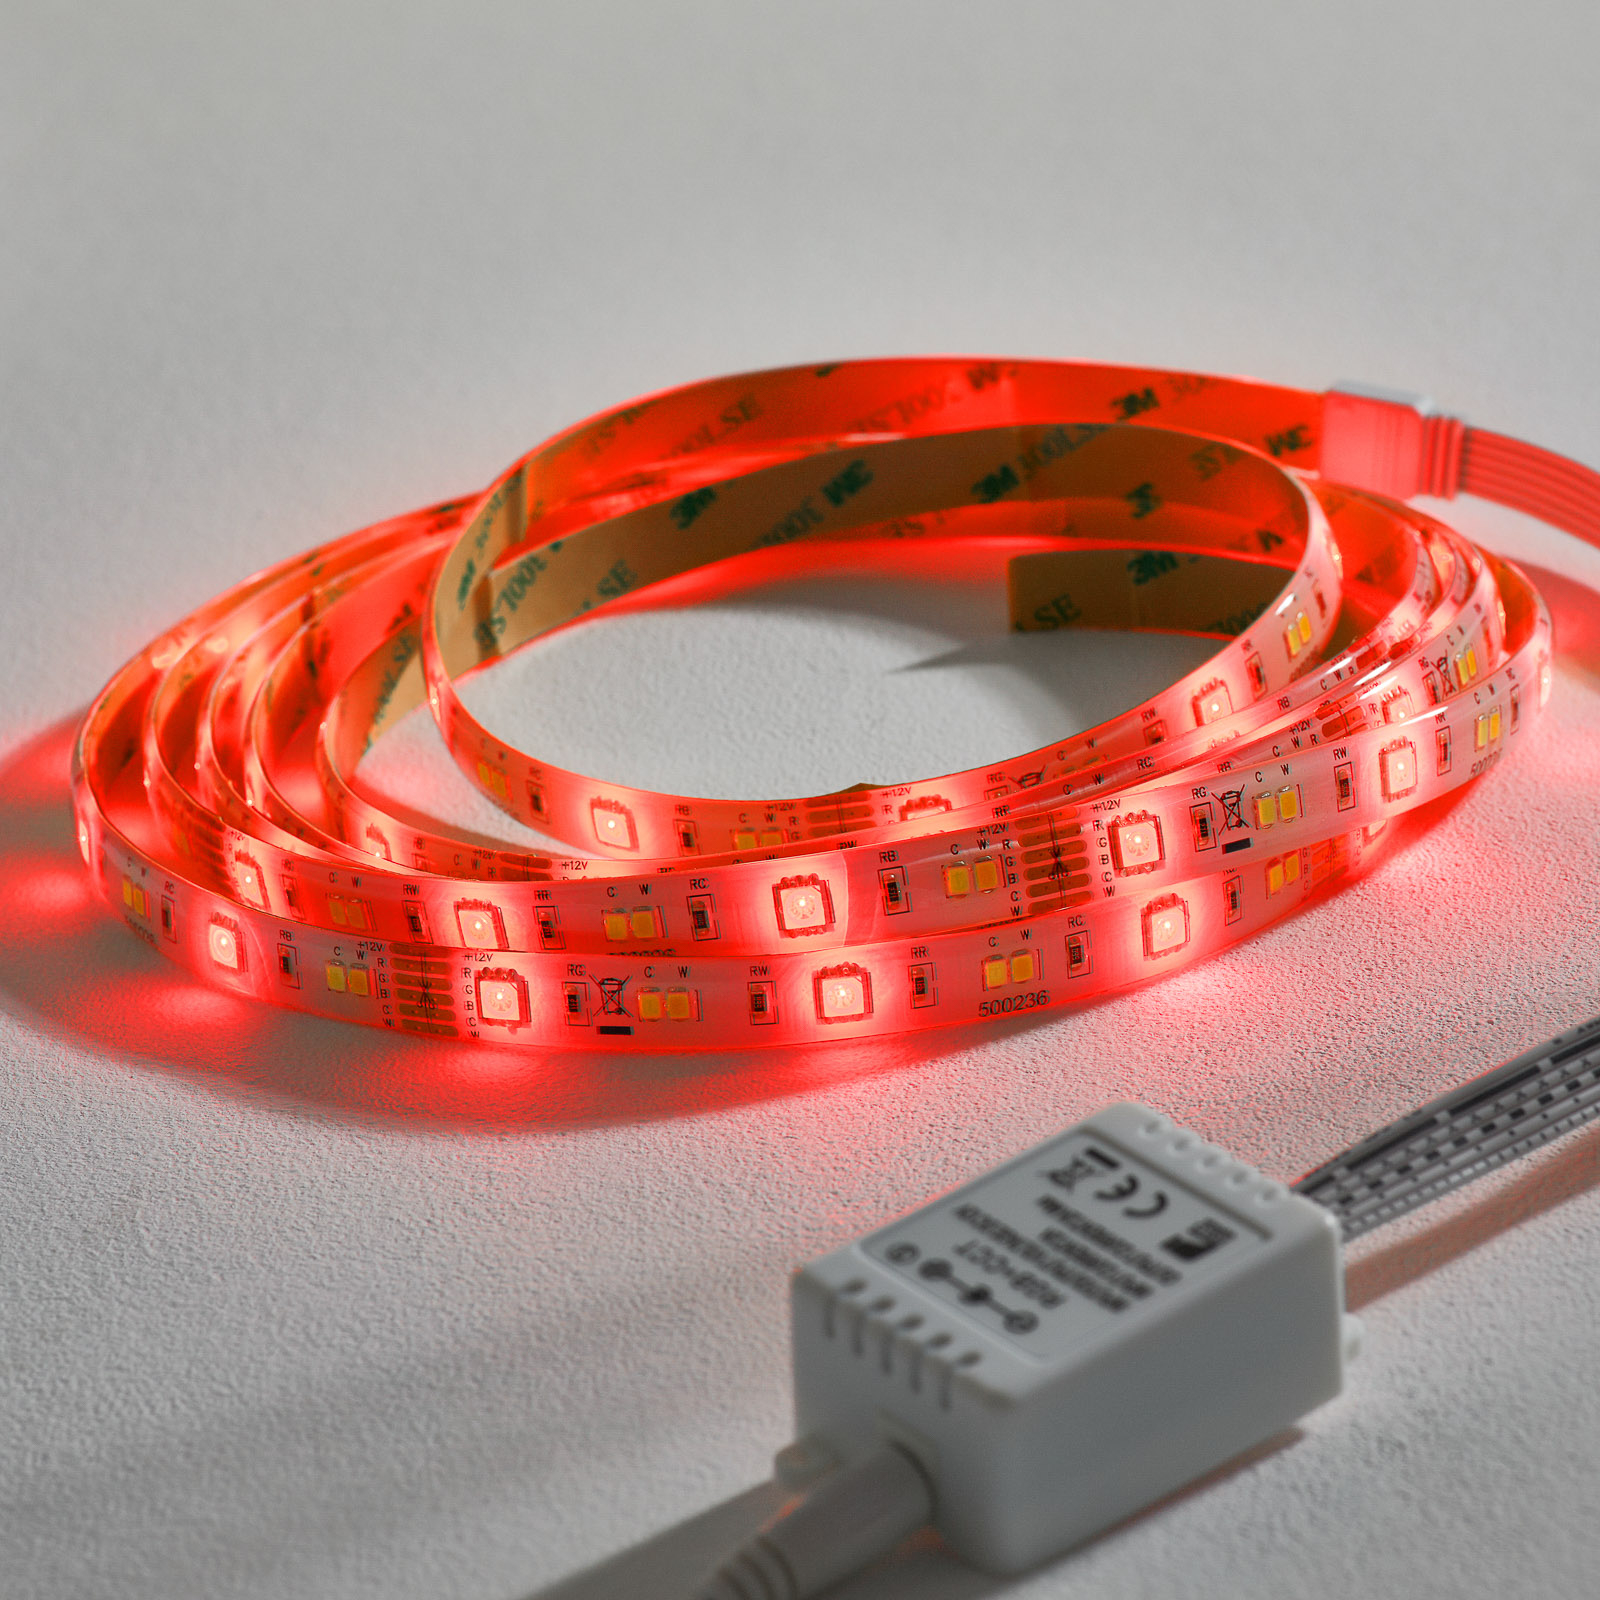 Beurs Ophef Heup EGLO connect Stripe-C LED strip RGB 2.700-6.500K | Lampen24.be